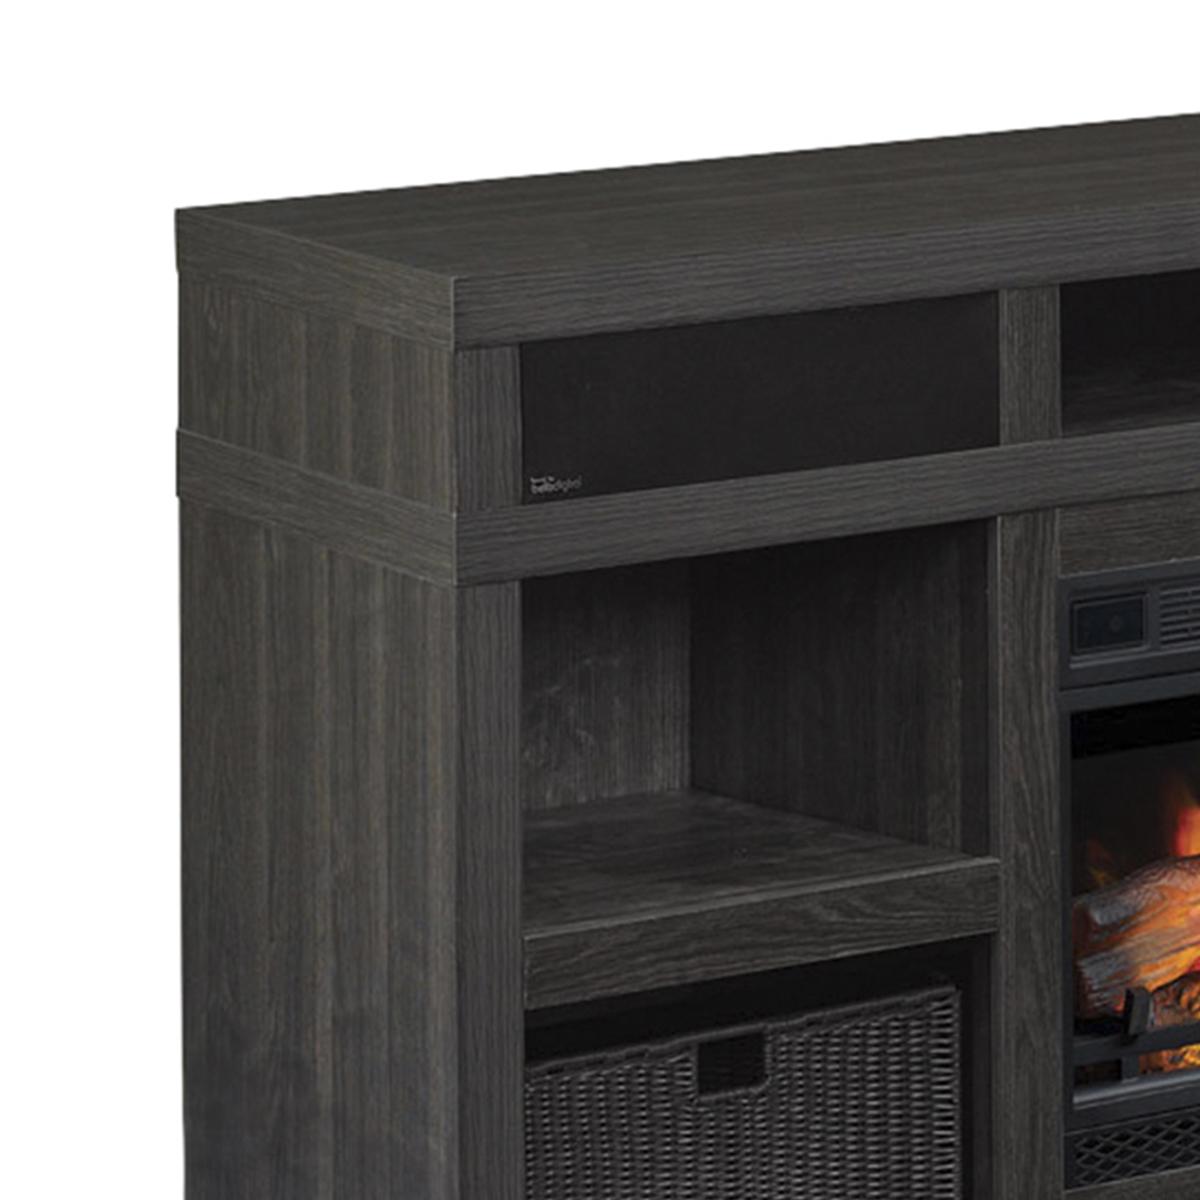 White Fireplace Tv Stand Inspirational Fabio Flames Greatlin 64" Tv Stand In Black Walnut